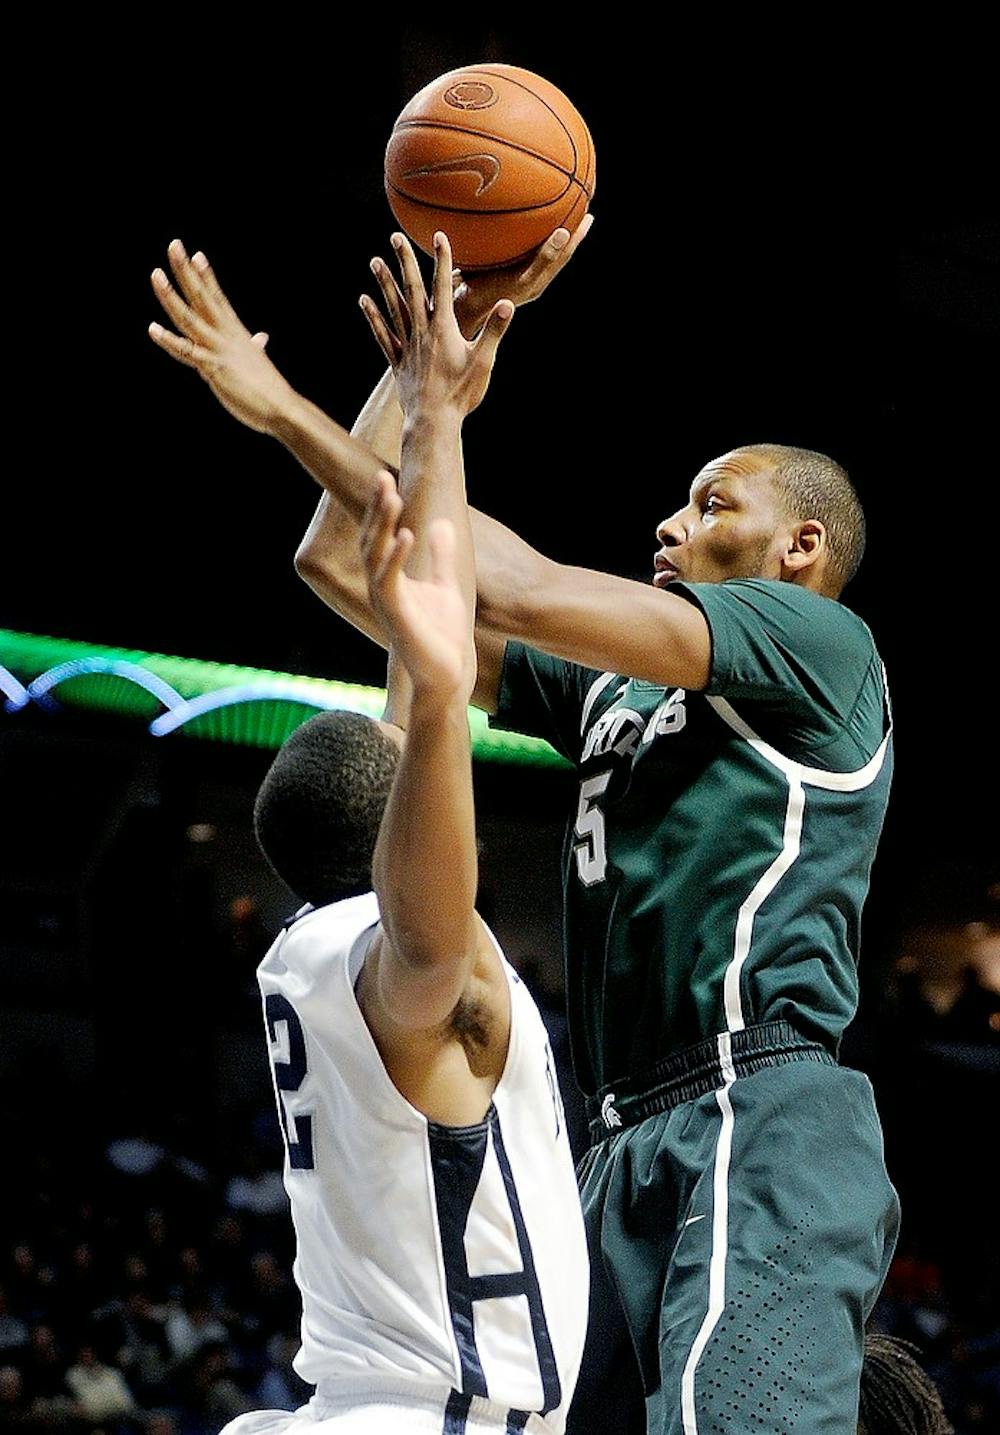 	<p>Junior center Adreian Payne shoots a basket over Penn State Nittany Lions D.J. Newbill during the second half of the game at the Bryce Jordan Center on Wednesday  in State College, Penn. The Spartans won, 81-72. Abby Drey/Centre Daily Times/MCT</p>